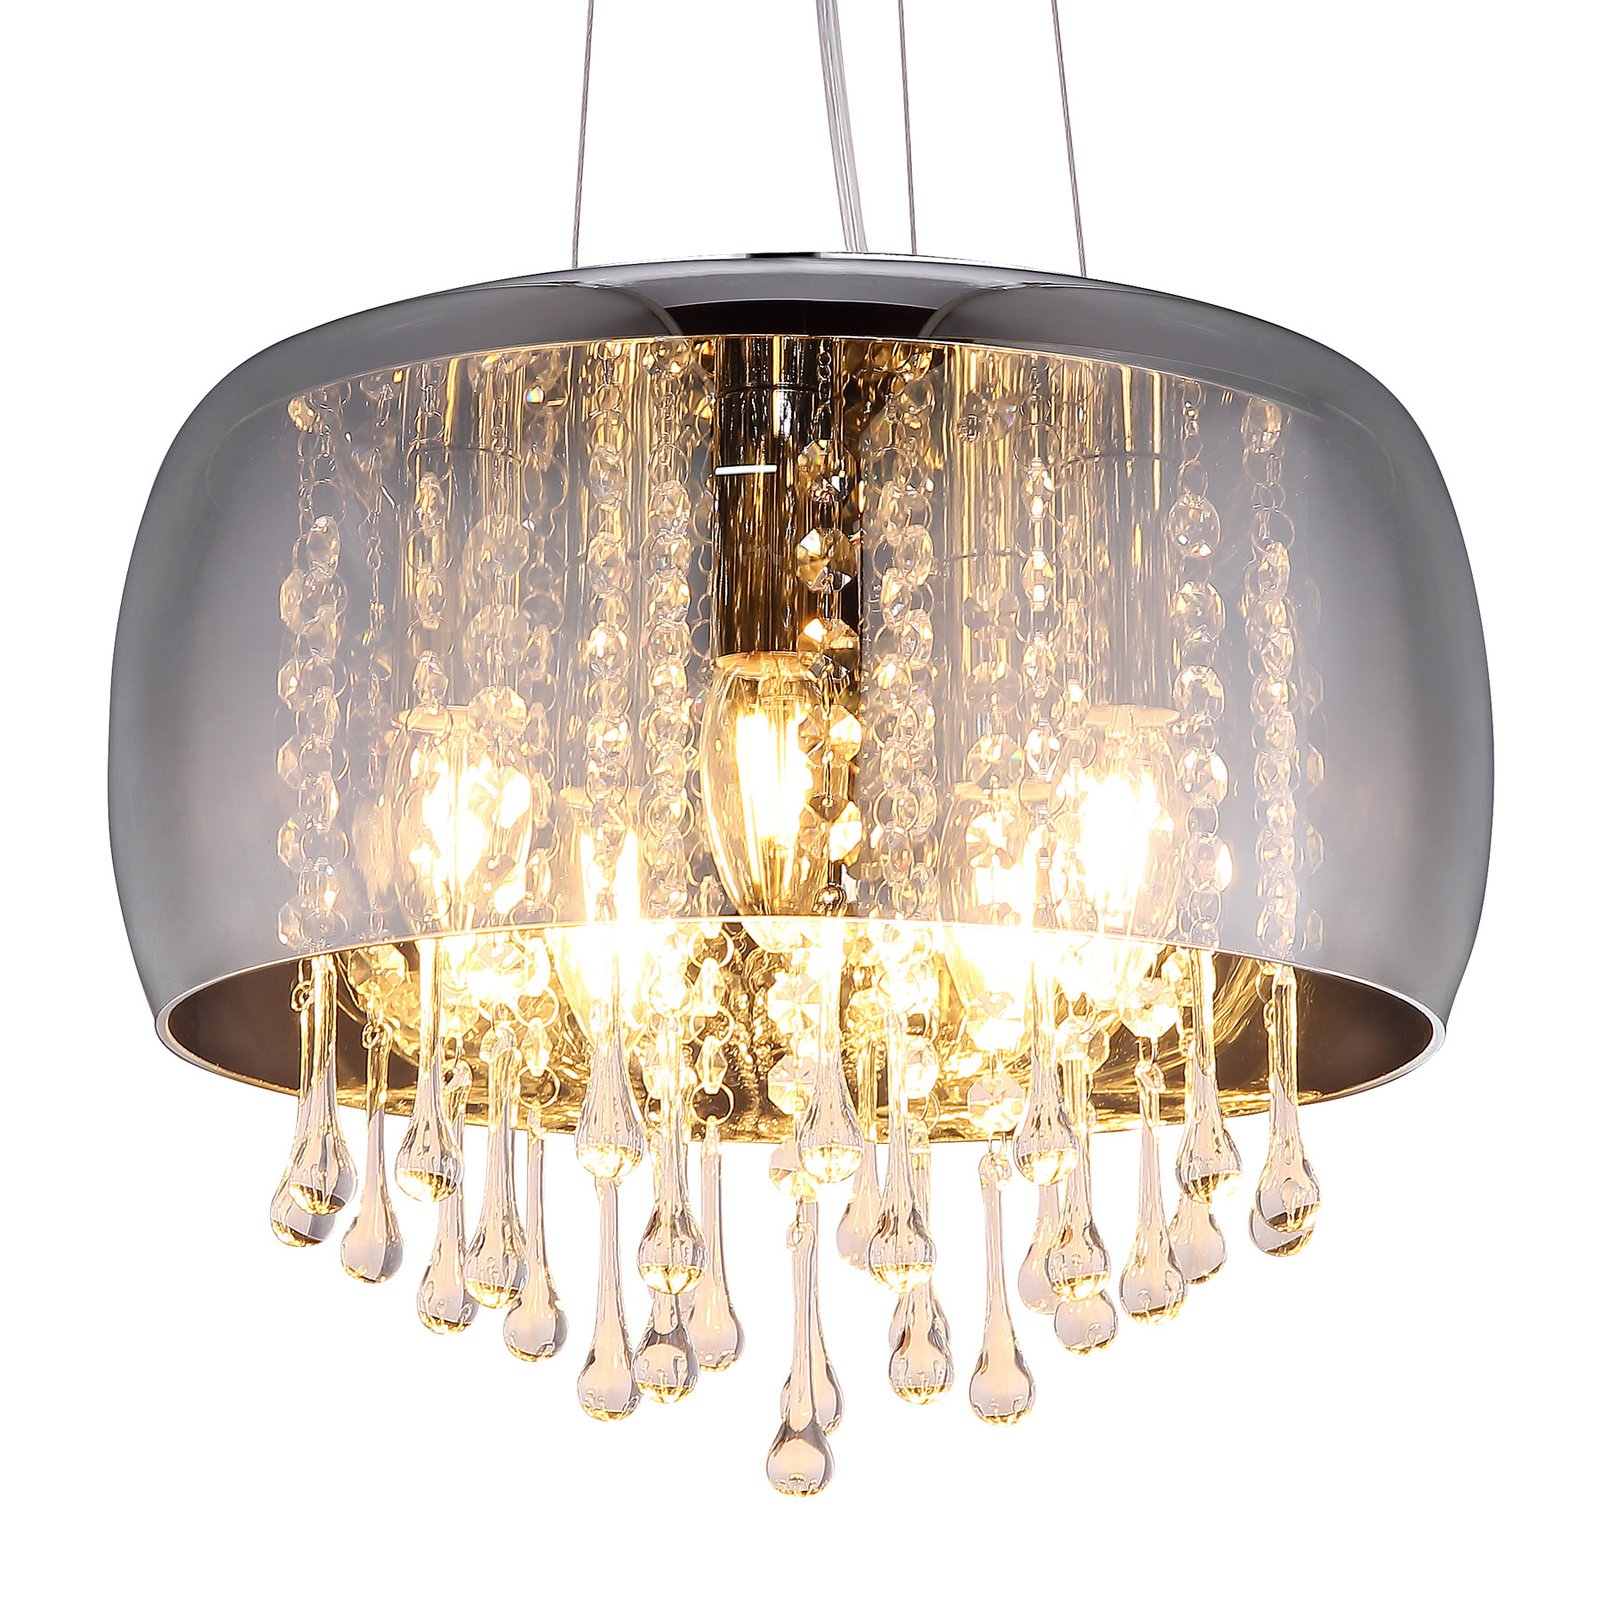 Kalla hanging light with decorative glass crystals